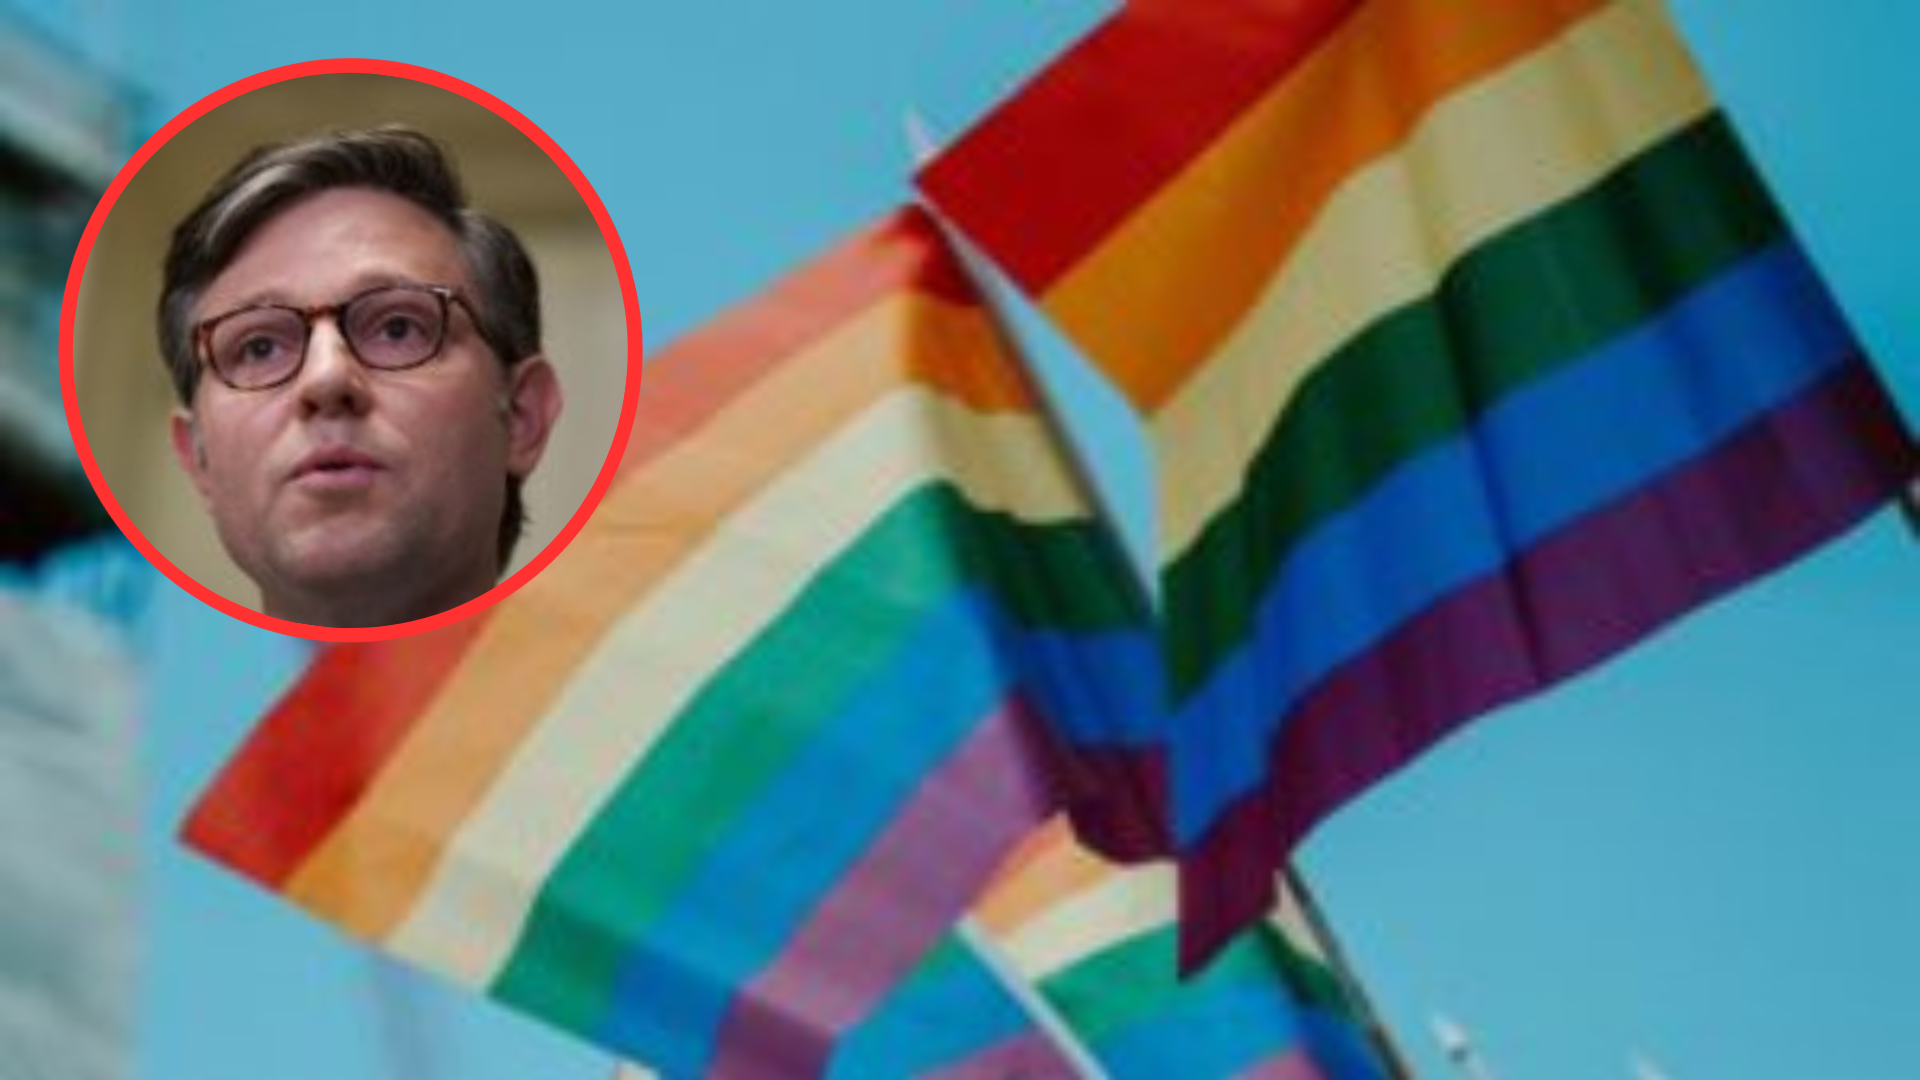 Close-up portrait of Mike Johnson, wearing rectangular glasses with a focused expression / Close-up of vibrant rainbow-colored flags fluttering against a clear blue sky